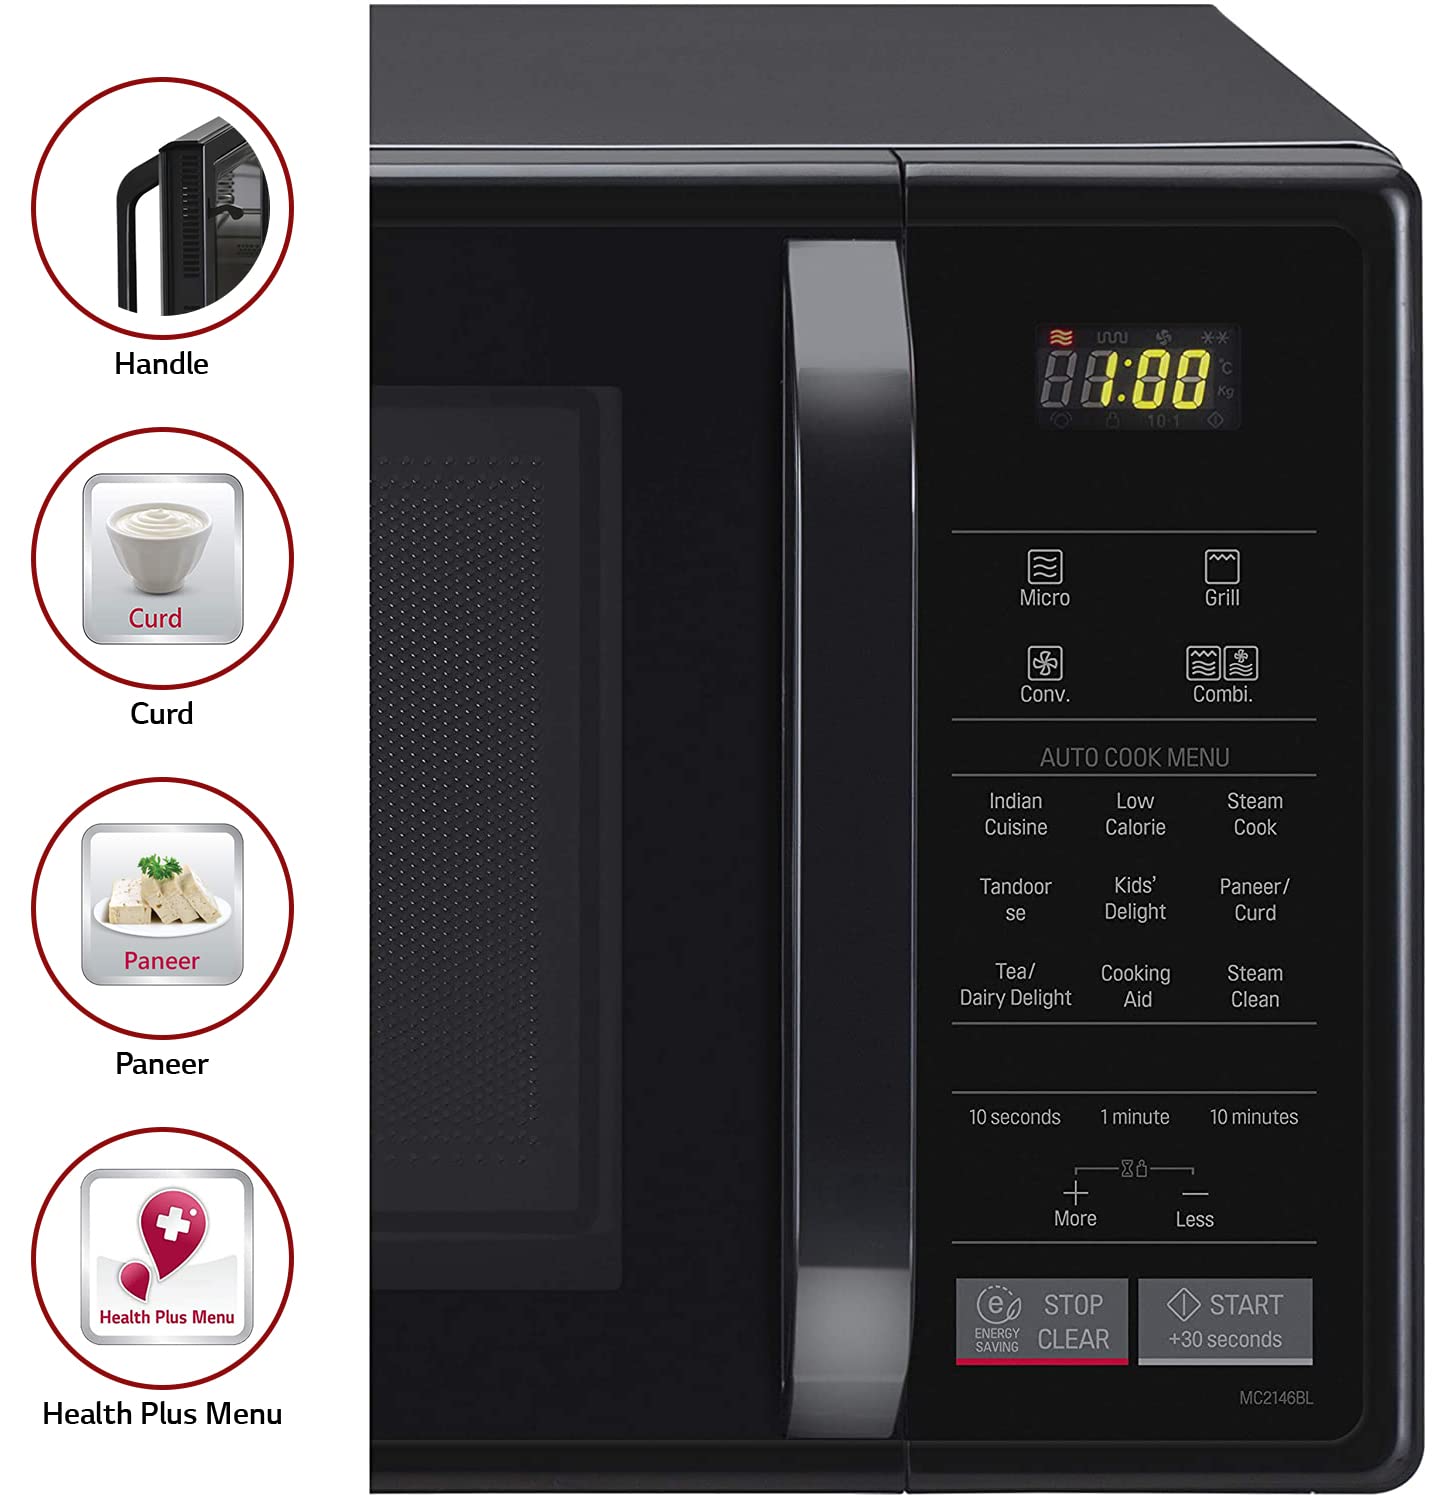 LG 21 L All In One Convection Microwave Oven (MC2146BL, Black)